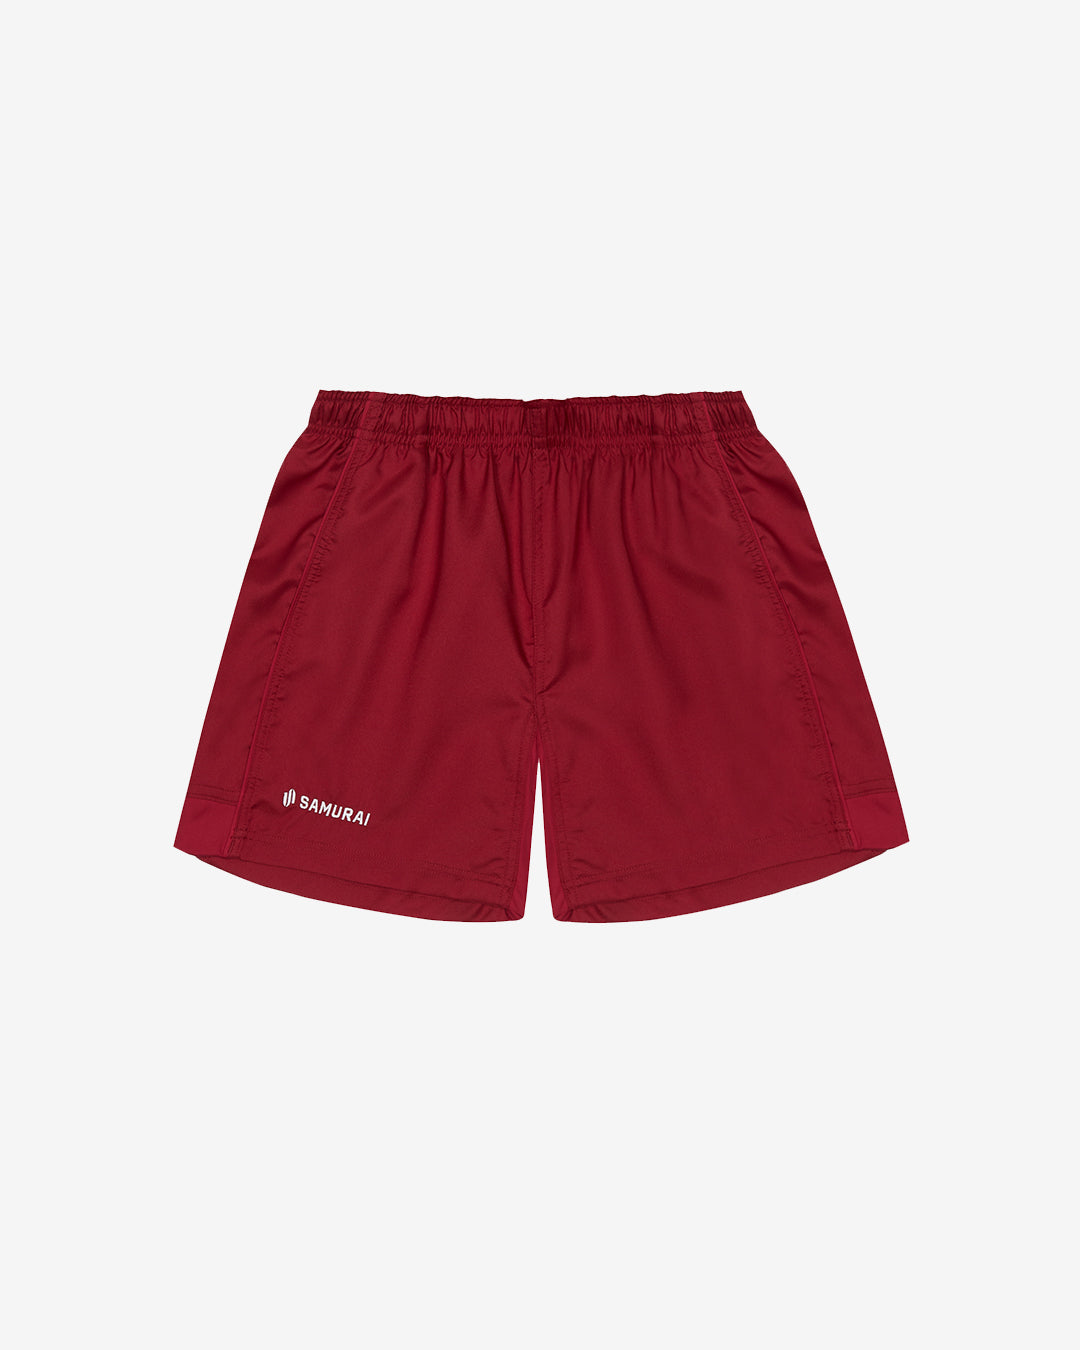 EP:0119 - Rugby Shorts - Maroon